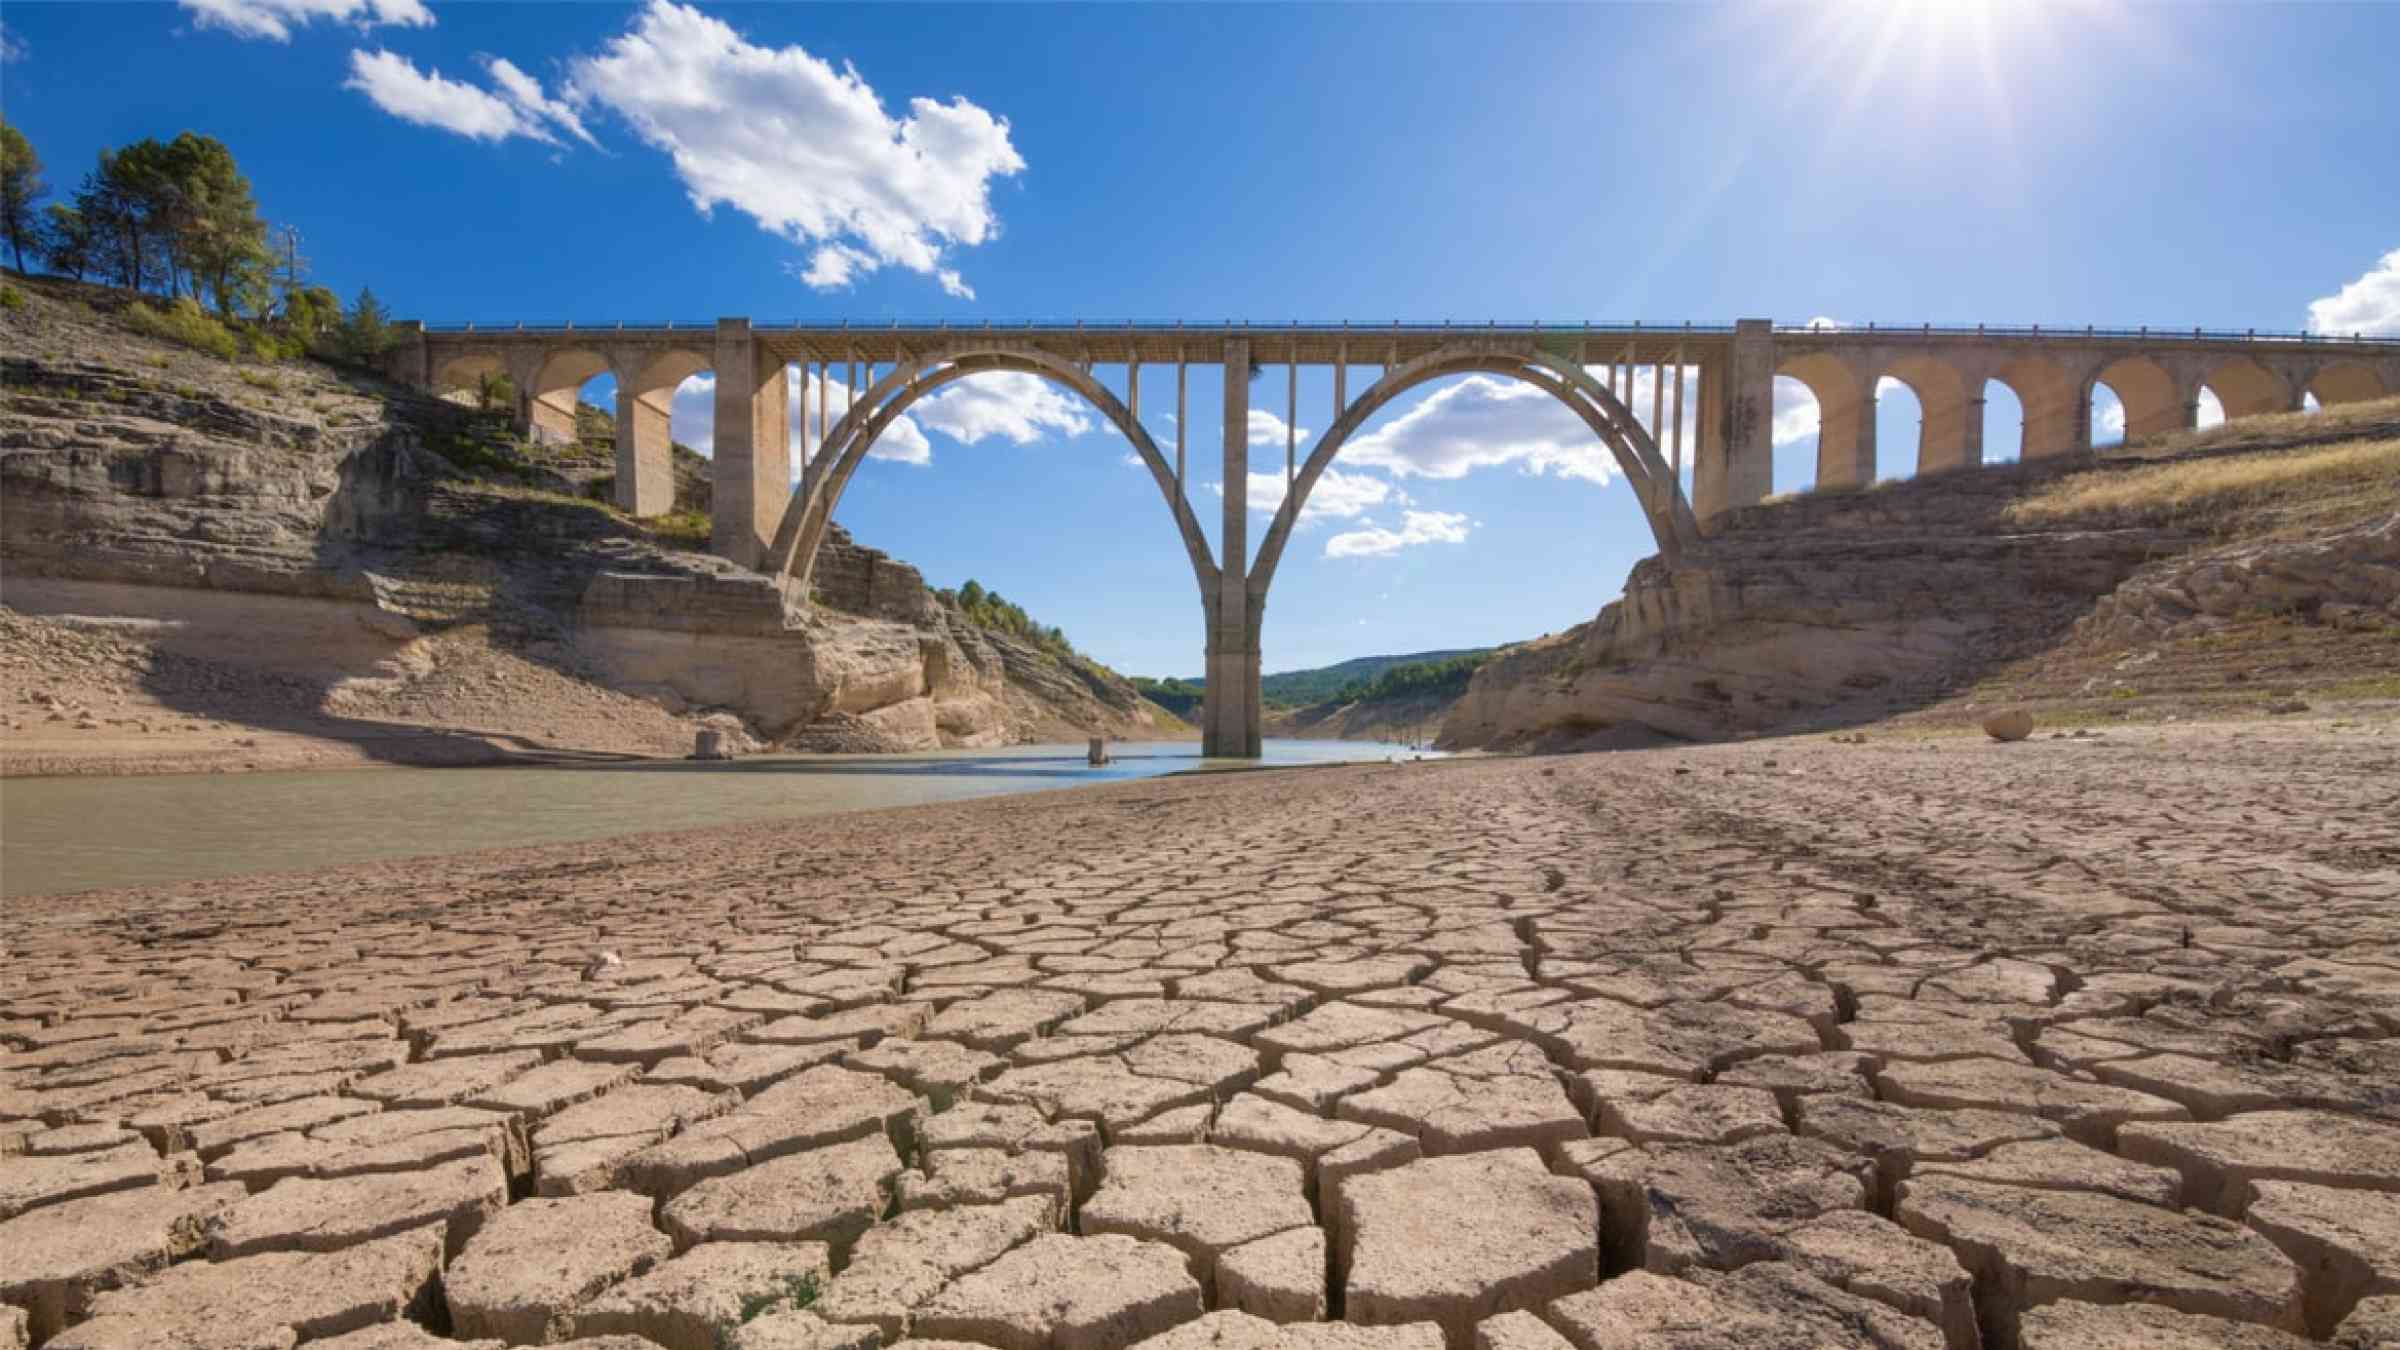 Dry ground close to a viaduct in Spain